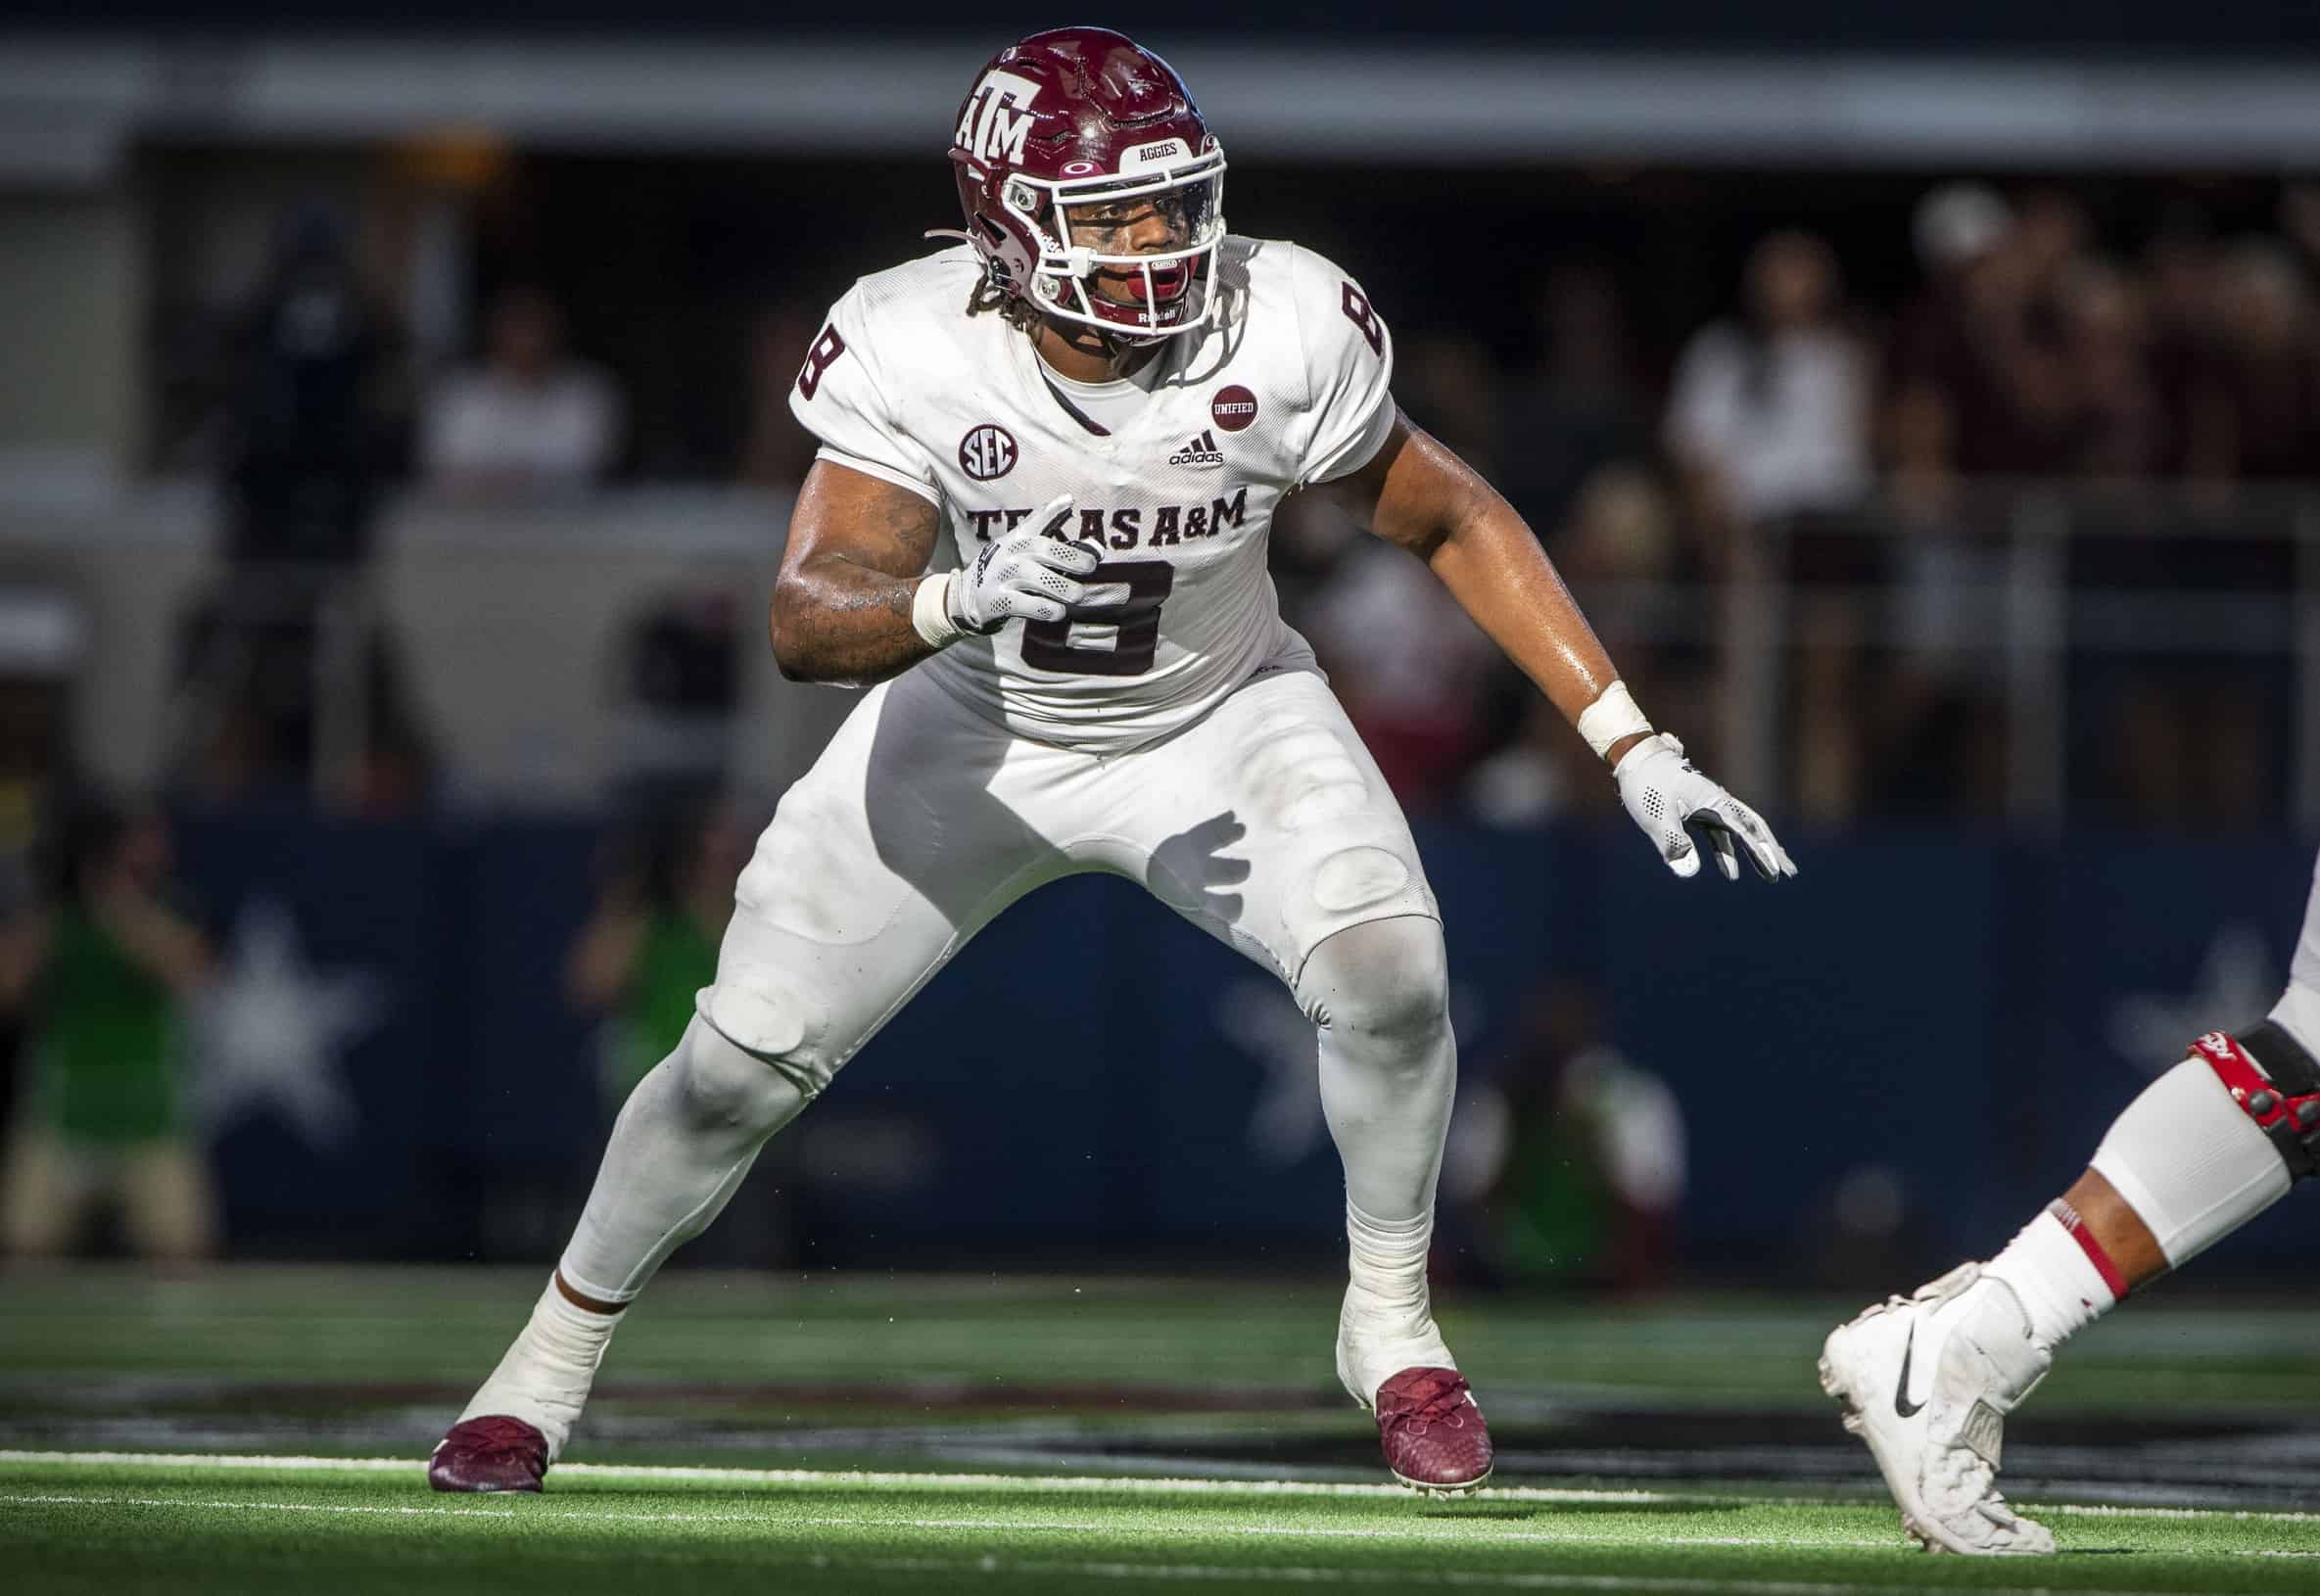 Texas A&M 2022 NFL Draft Scouting Reports include Isaiah Spiller